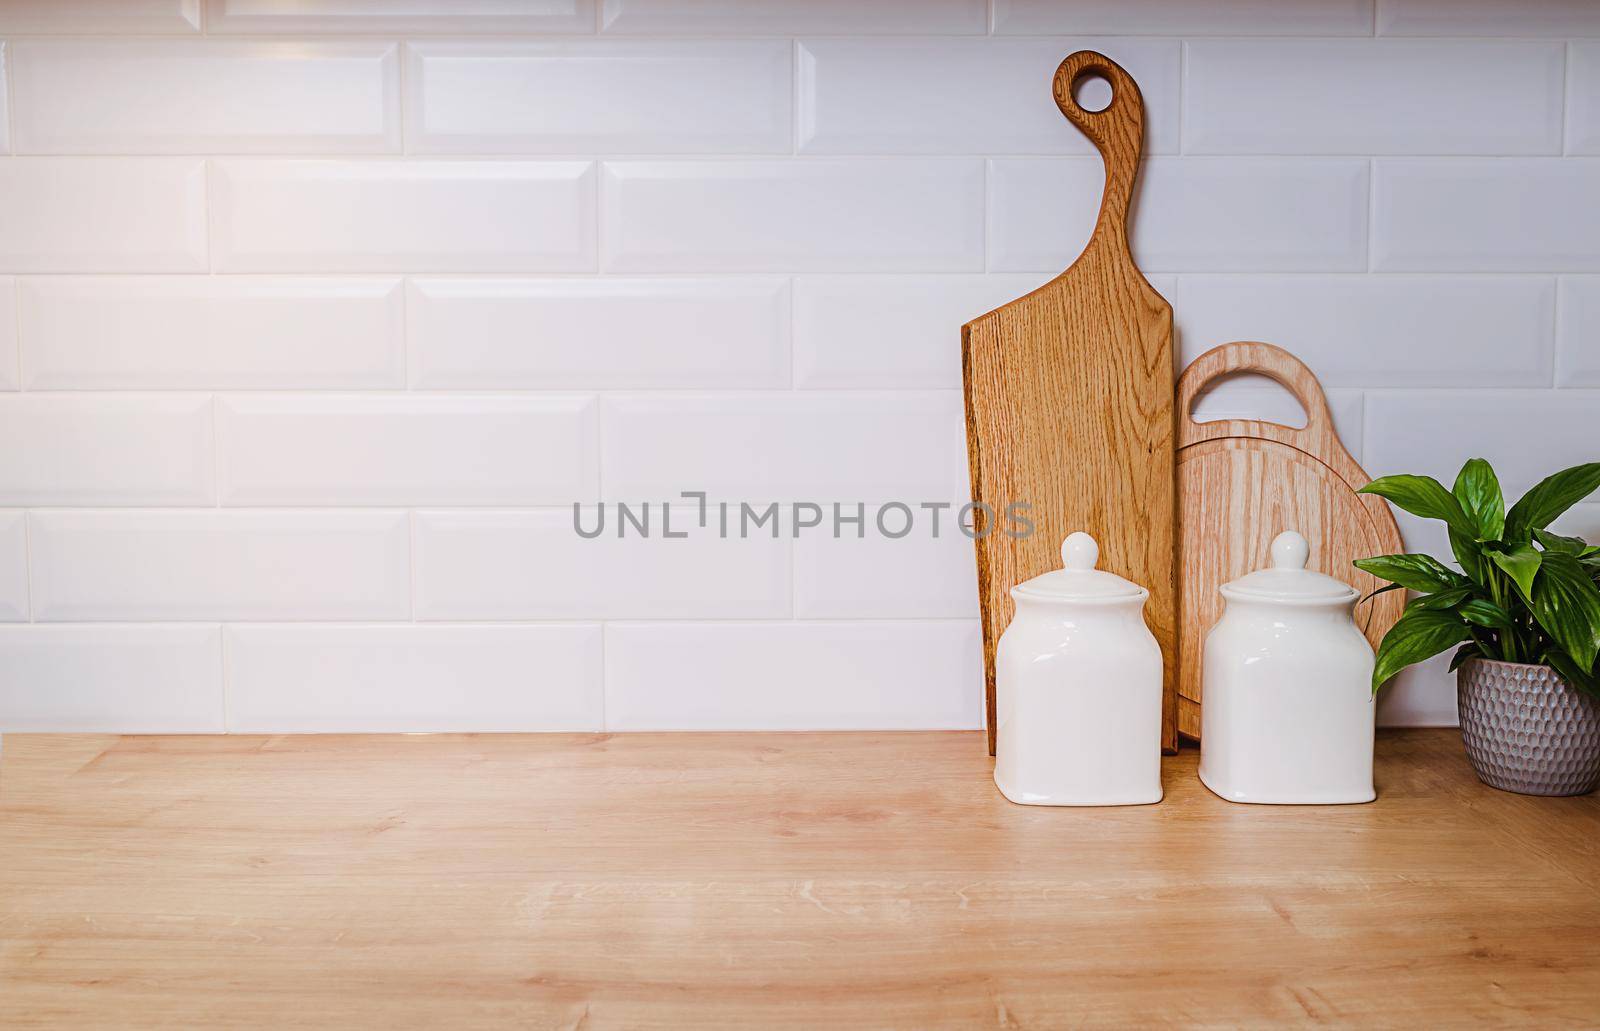 Template, vintage kitchen mockup with copy paste. Dishes, wooden boards and flowers culinary background. home cooking concept. Large empty piece of white wall, ceramic tile